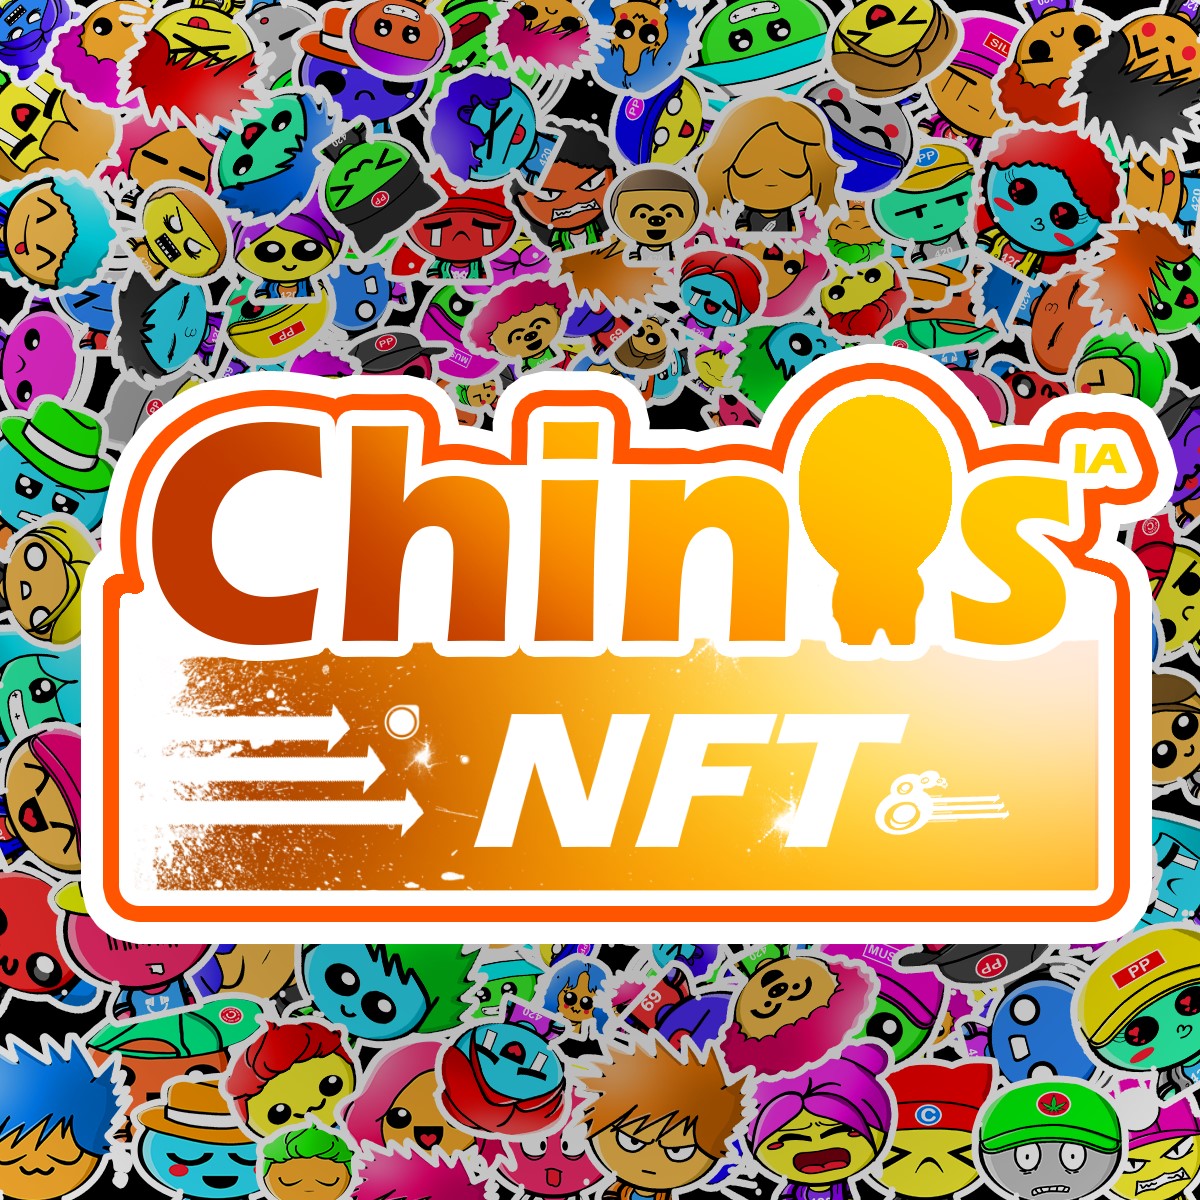 Chinis NFT